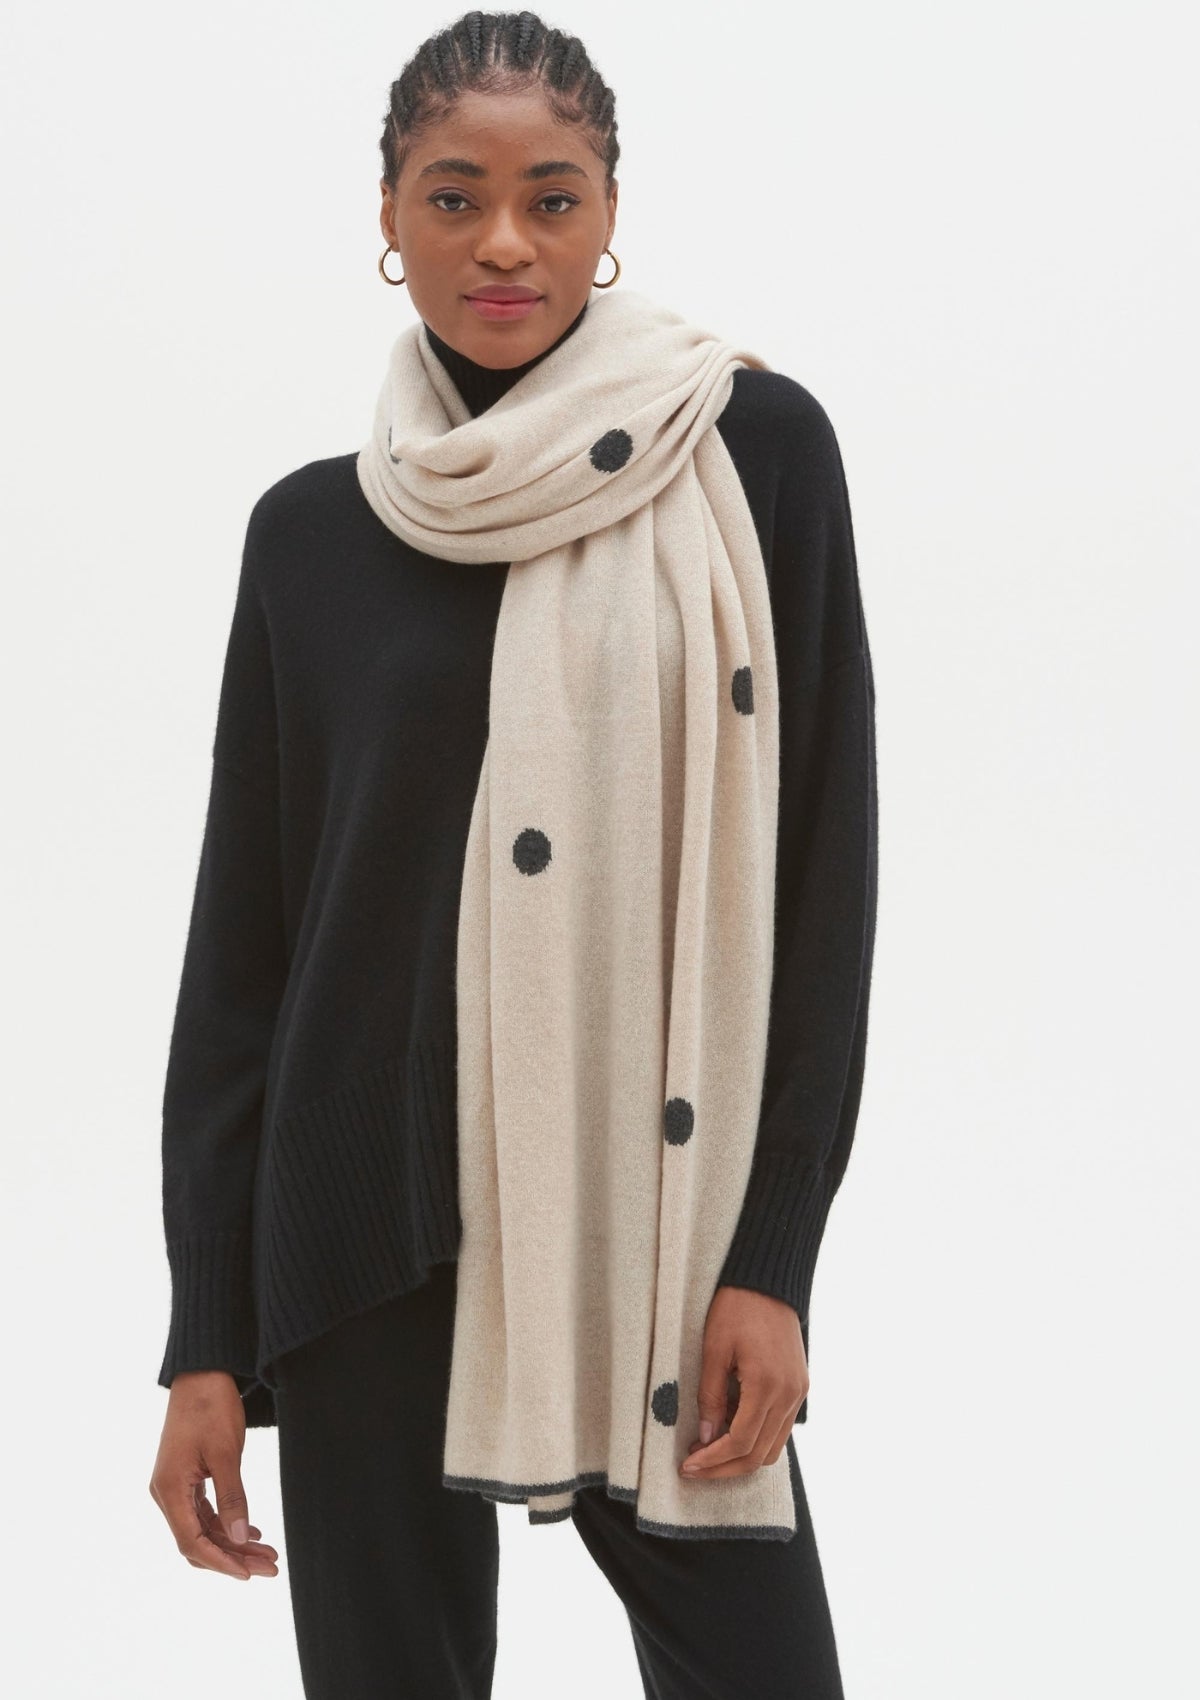 Patterned Cashmere Scarf in Birch/Flannel